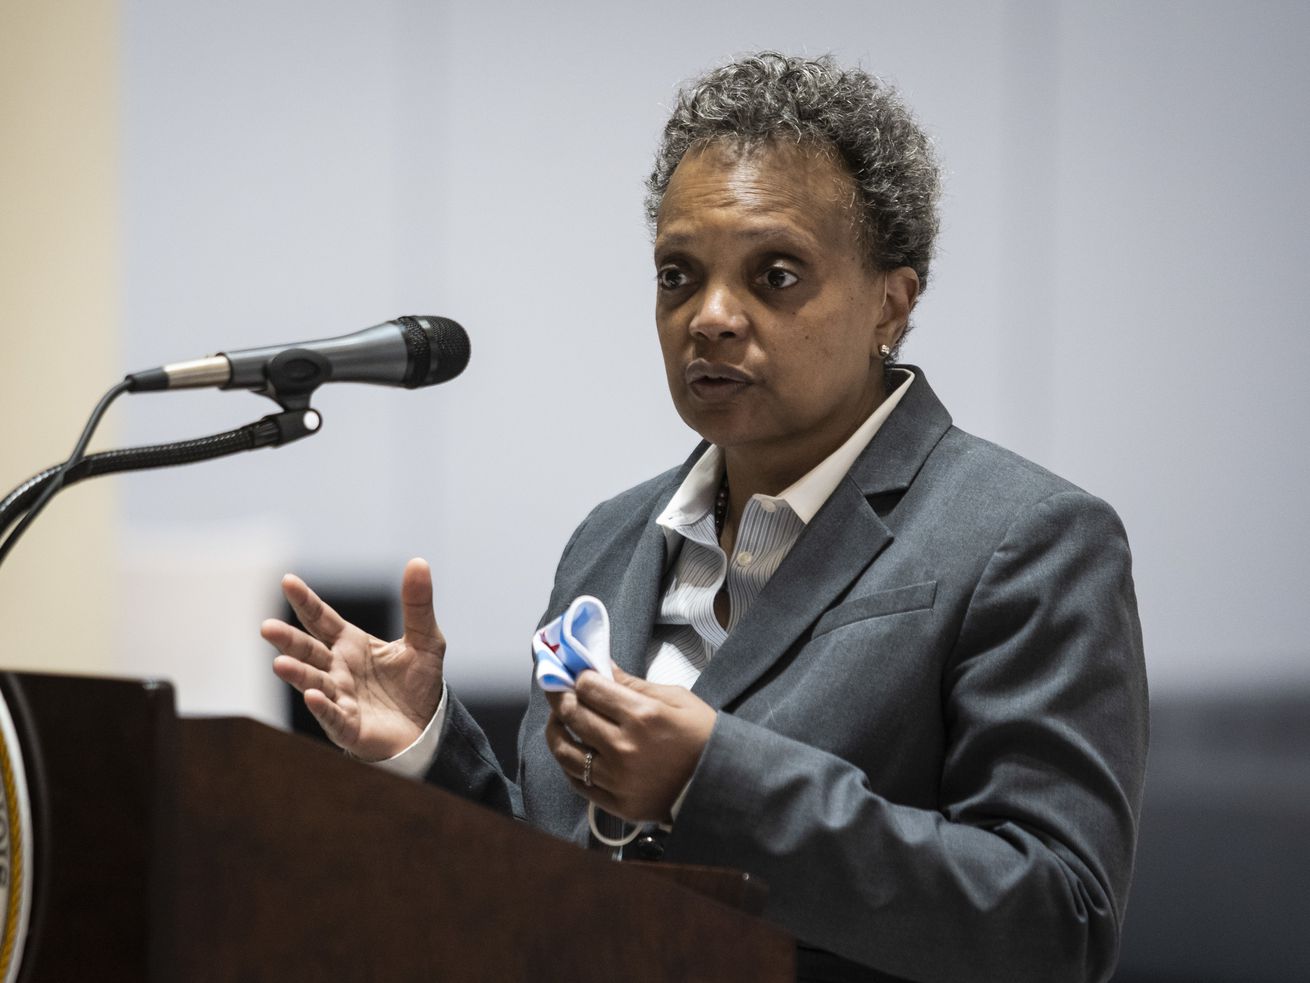 “I have been struck since my first day on the campaign trail back in 2018 by the overwhelming whiteness and maleness of Chicago media outlets, editorial boards, the political press corps, and yes, the City Hall press corps specifically,” Lightfoot said in a two-page letter dated May 19 that was sent to the major news outlets in the city to explain her decision to offer Black and Brown journalists a rare interview opportunity.